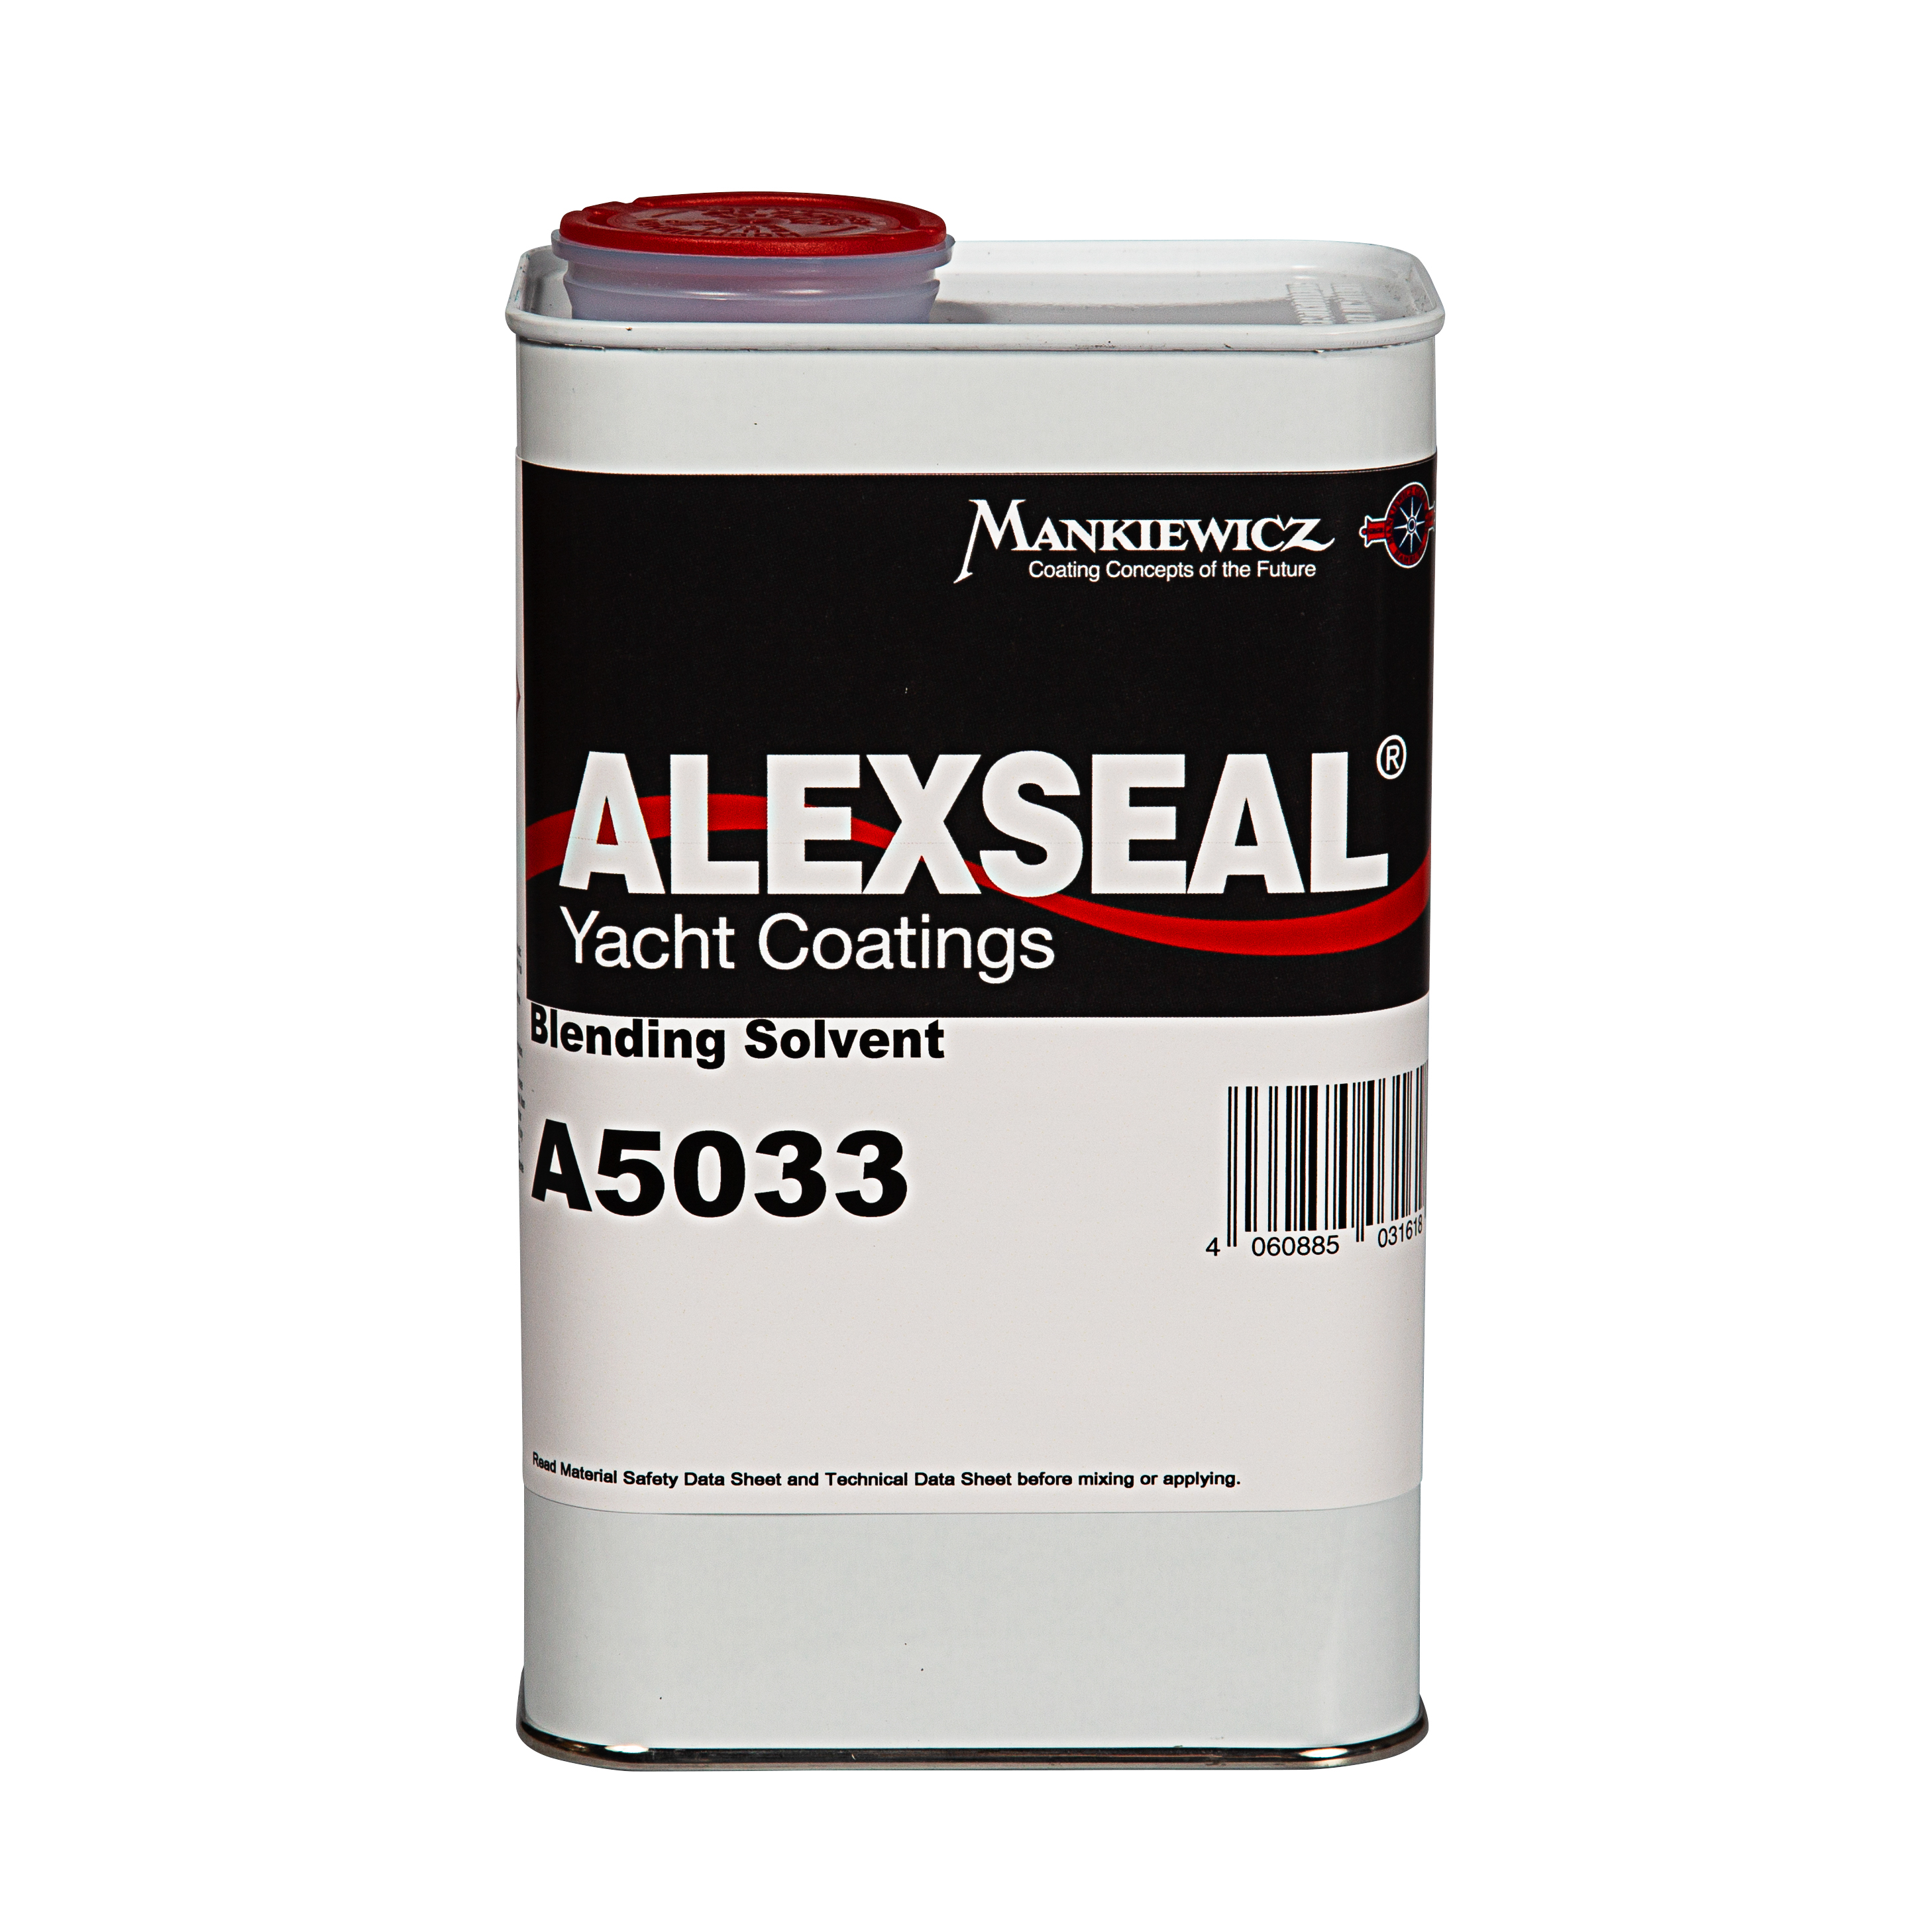 a5033 of Alexseal Yacht Coatings Blending Solvent